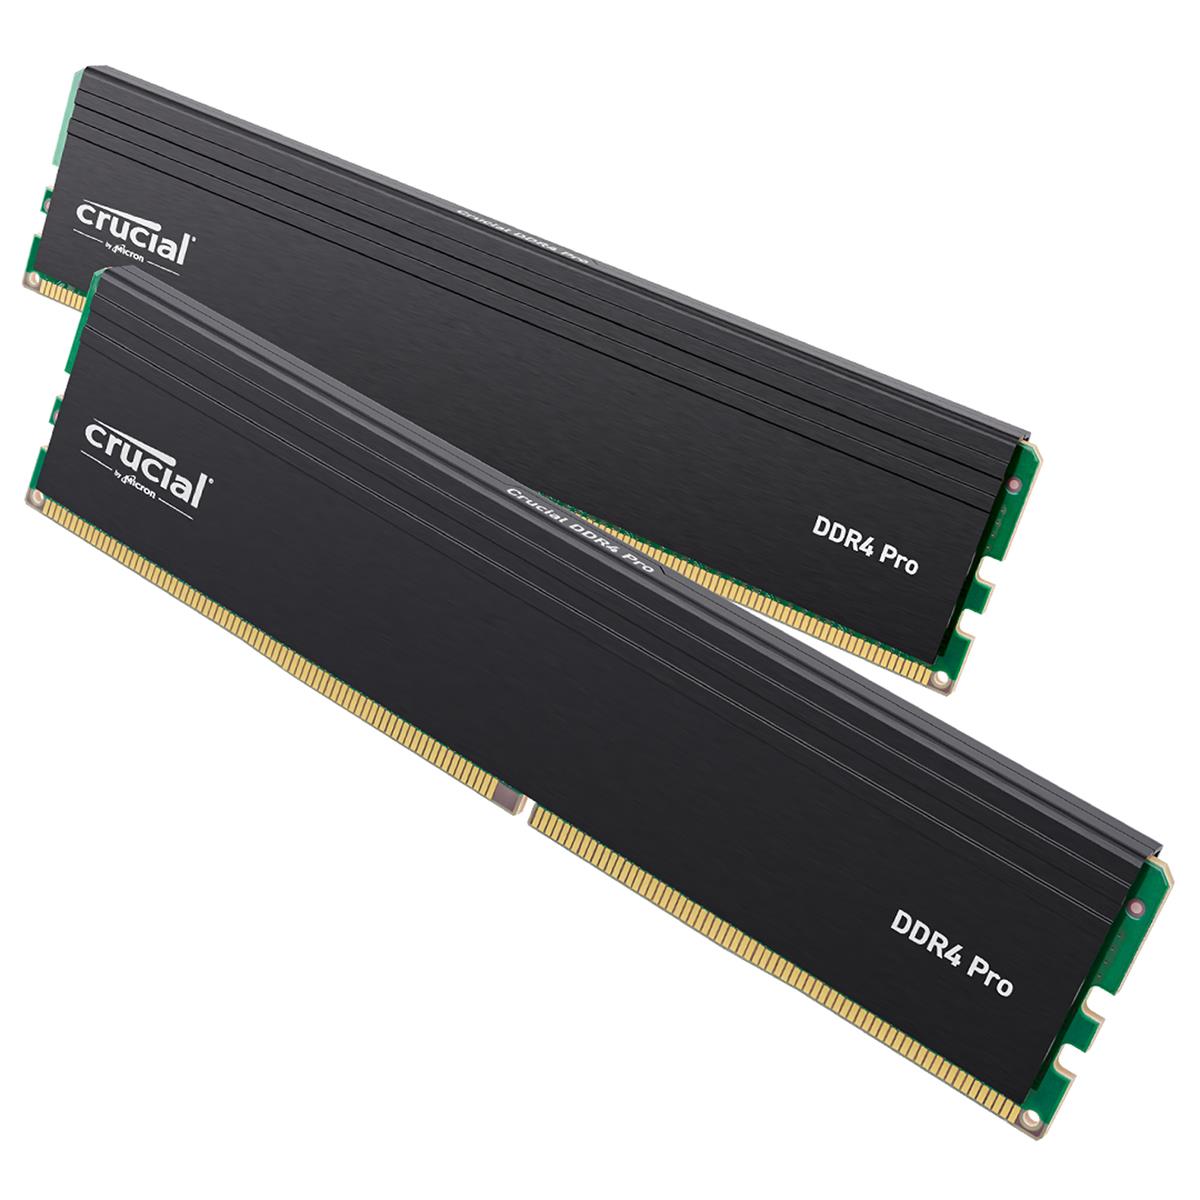 Image of Crucial Pro 64GB (2x32GB) DDR4 3200MHz CL22 UDIMM Desktop Memory Module